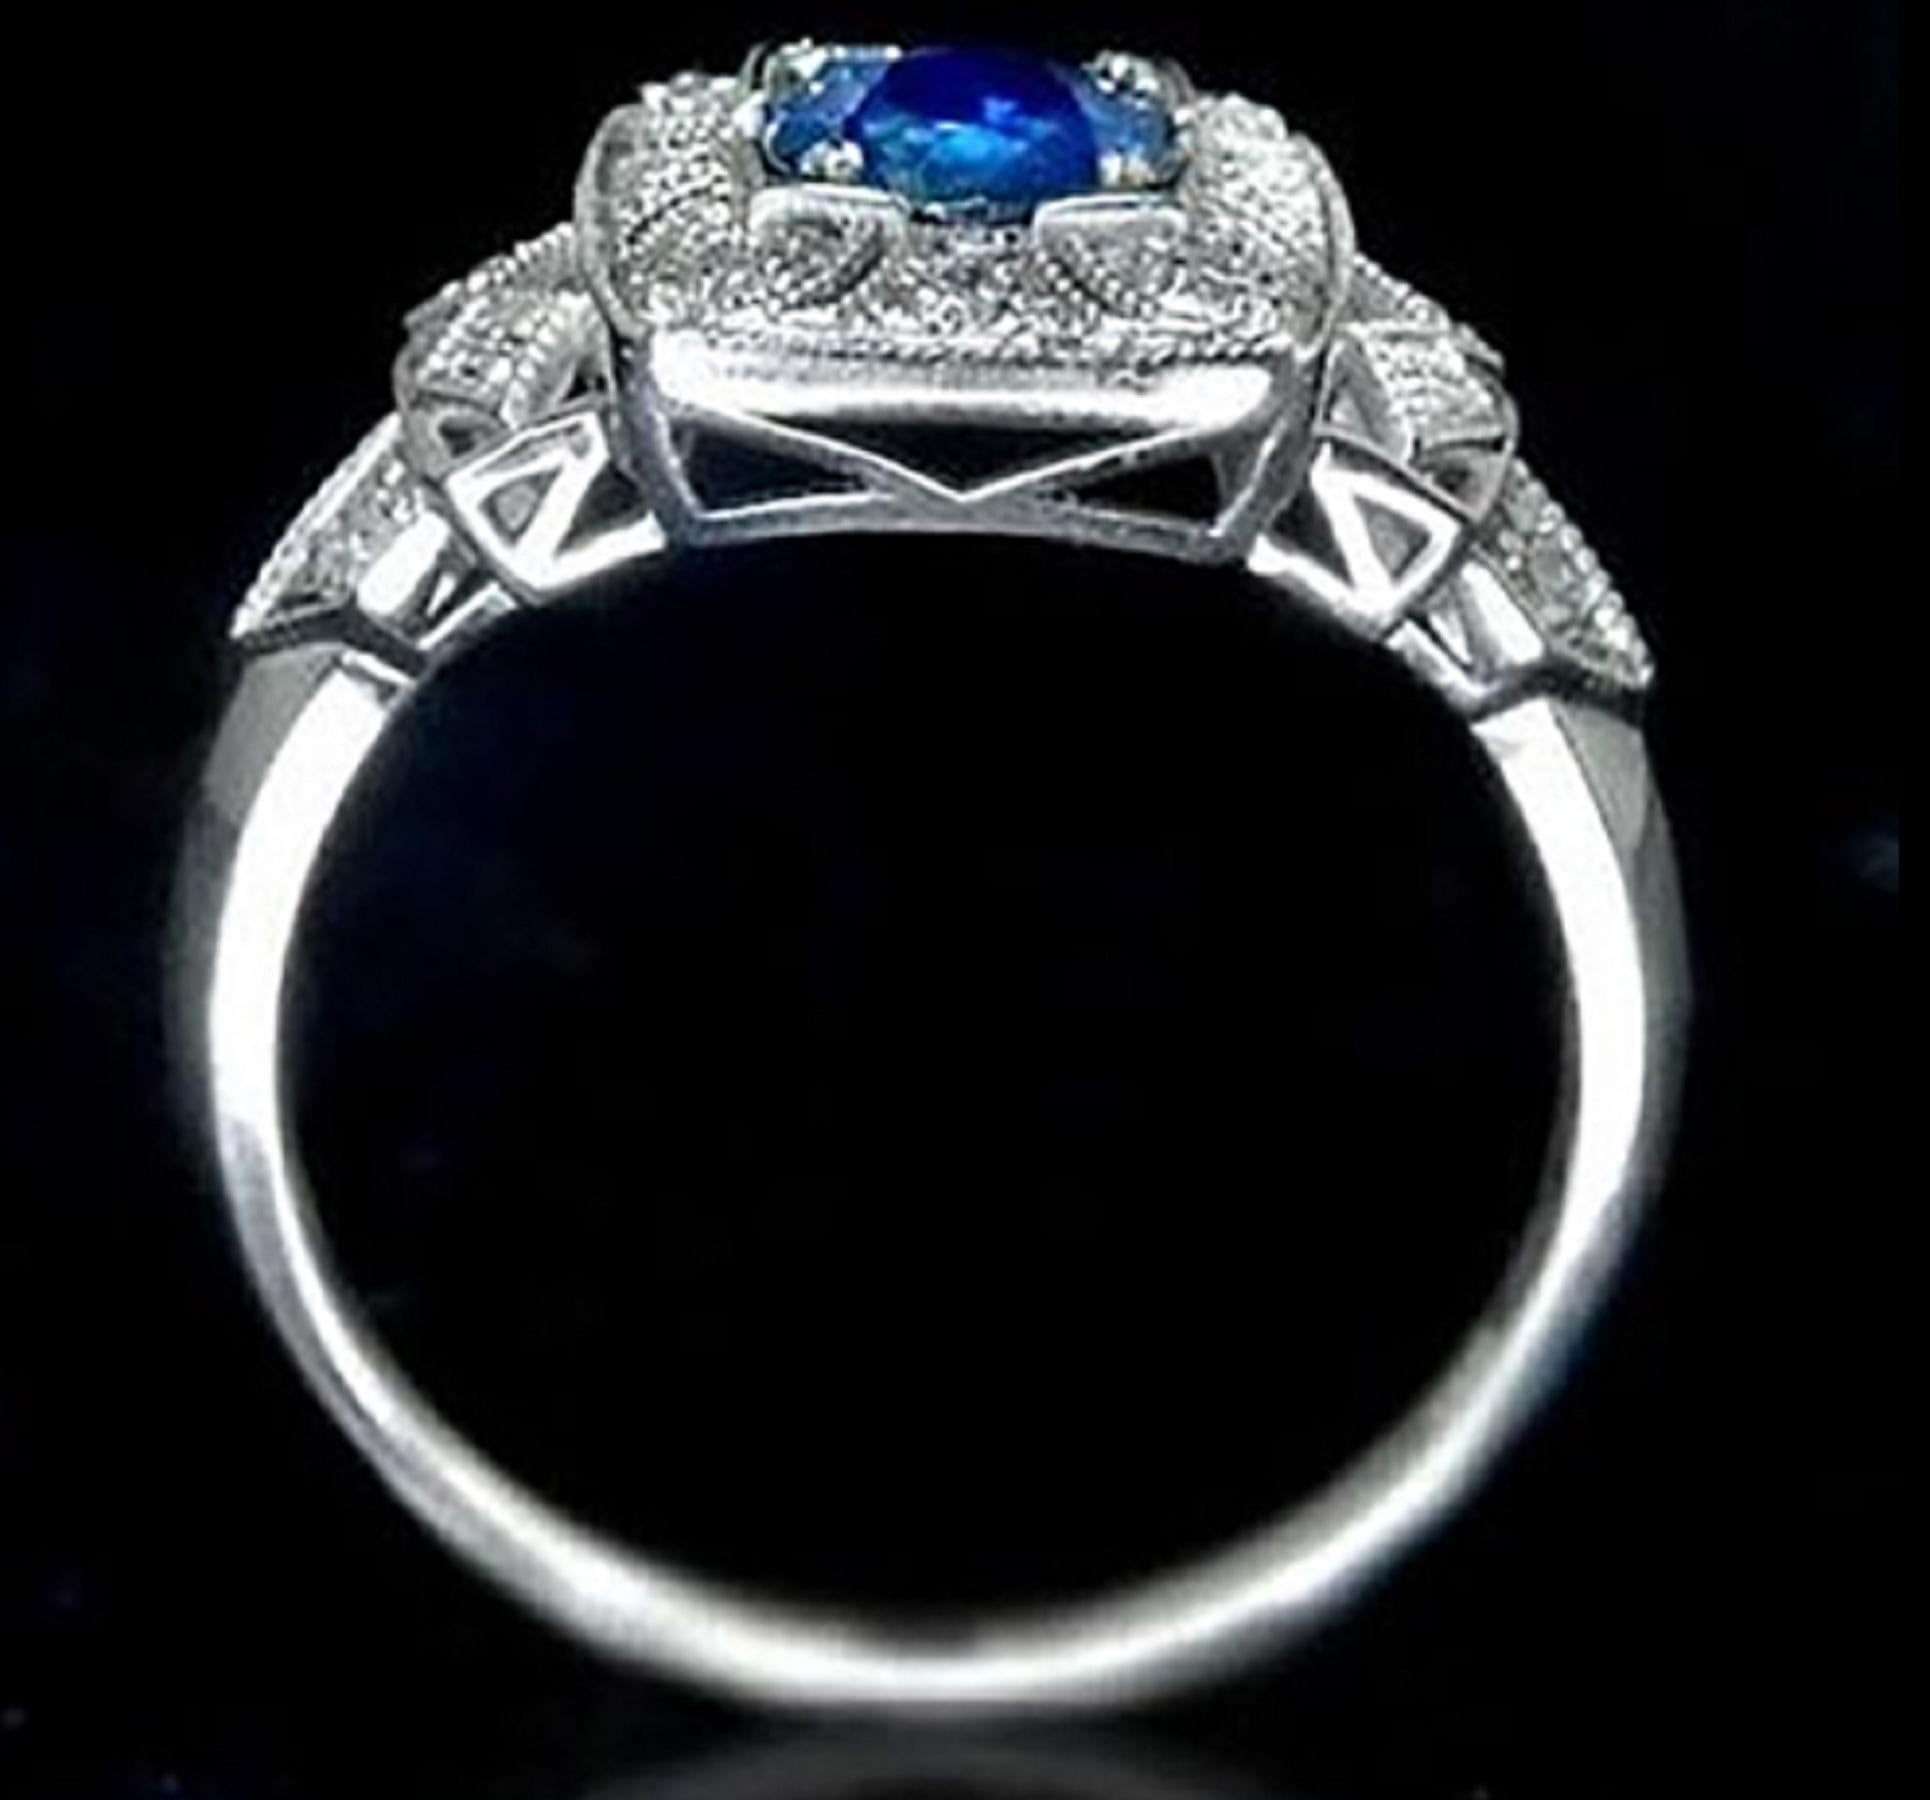 Gorgeous center sapphire. The color of the sapphire has a vibrant, vivid blue color that must be seen in person to be fully appreciated. The sapphire is well cut and exhibits lovely sparkle. 

The center is surrounded by 16 brilliant diamonds, set